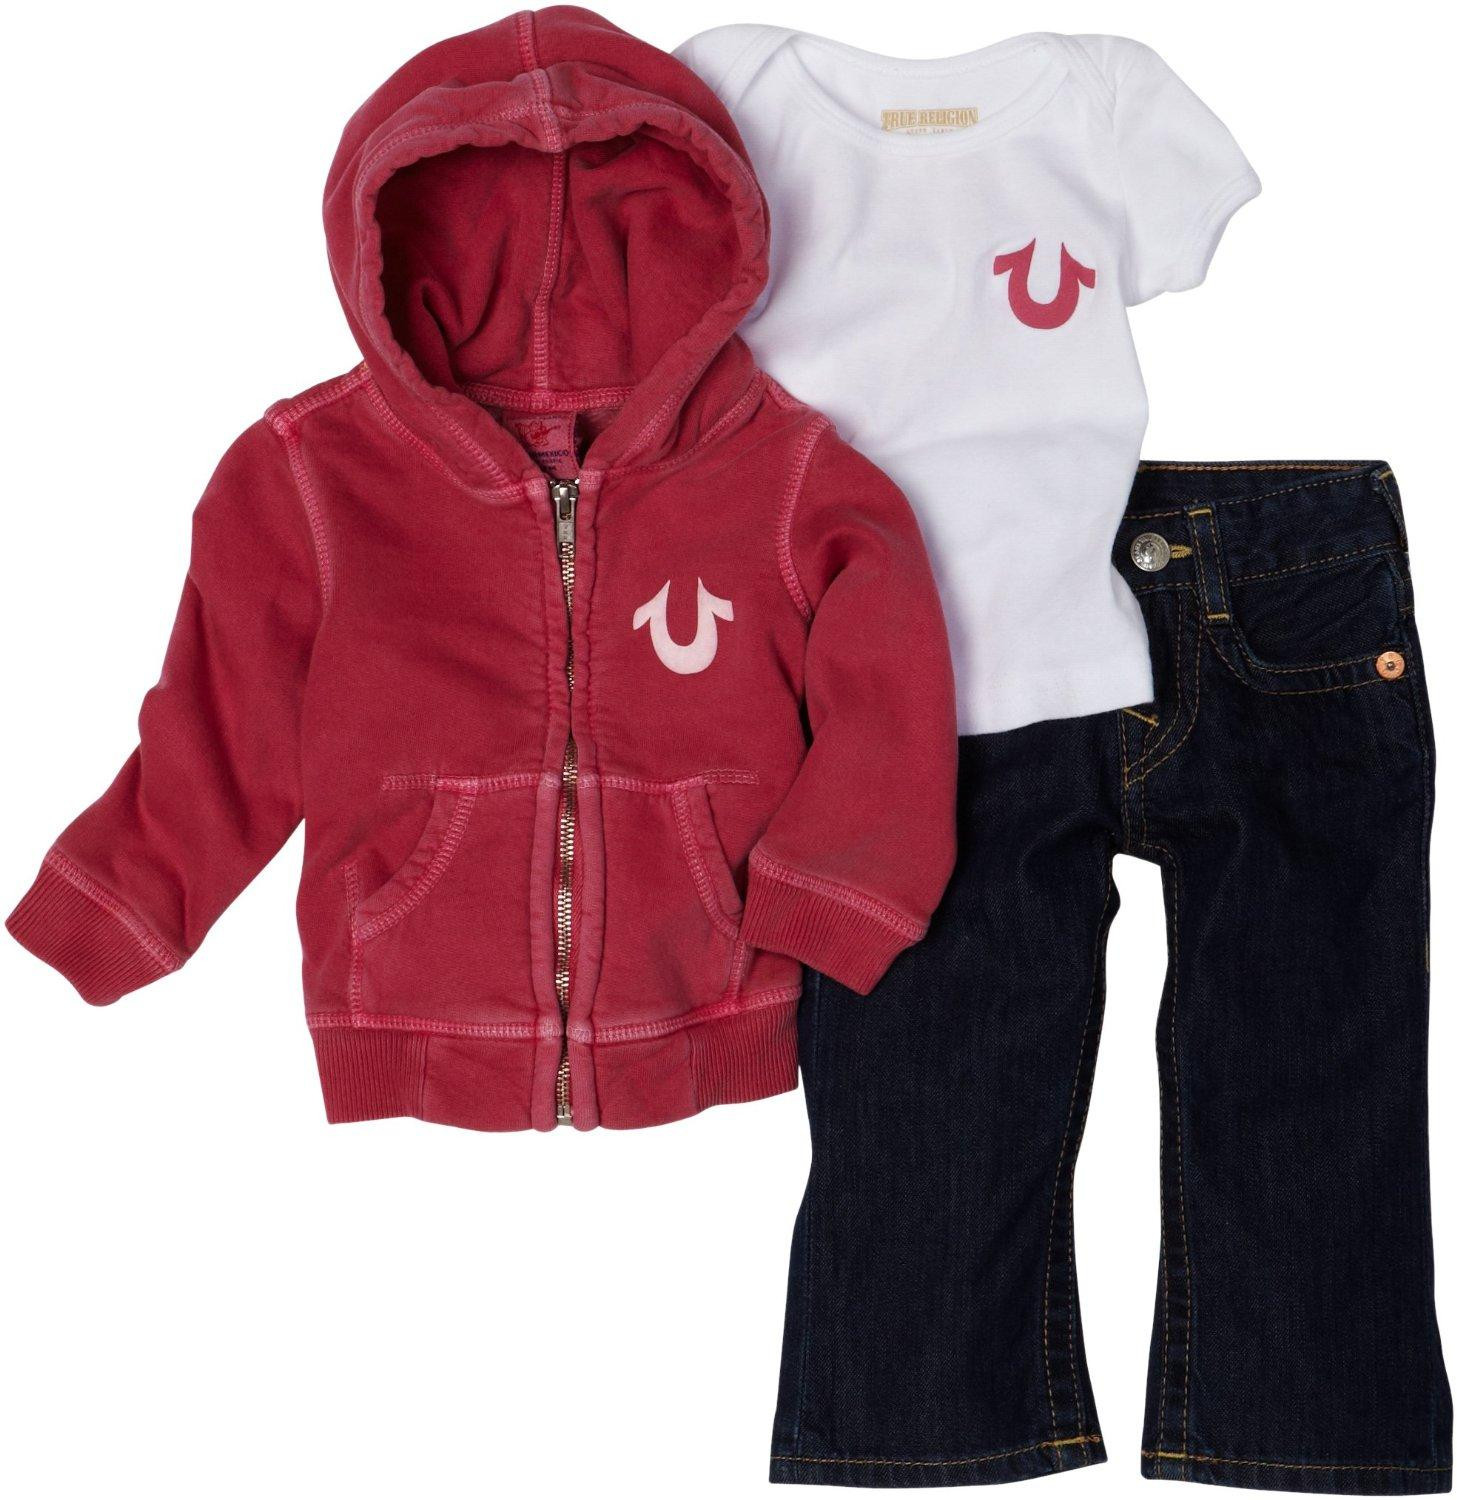 Baby True Religion Gift Sets
 Discounted True Religion Uni Baby Infant Baby 3 Piece